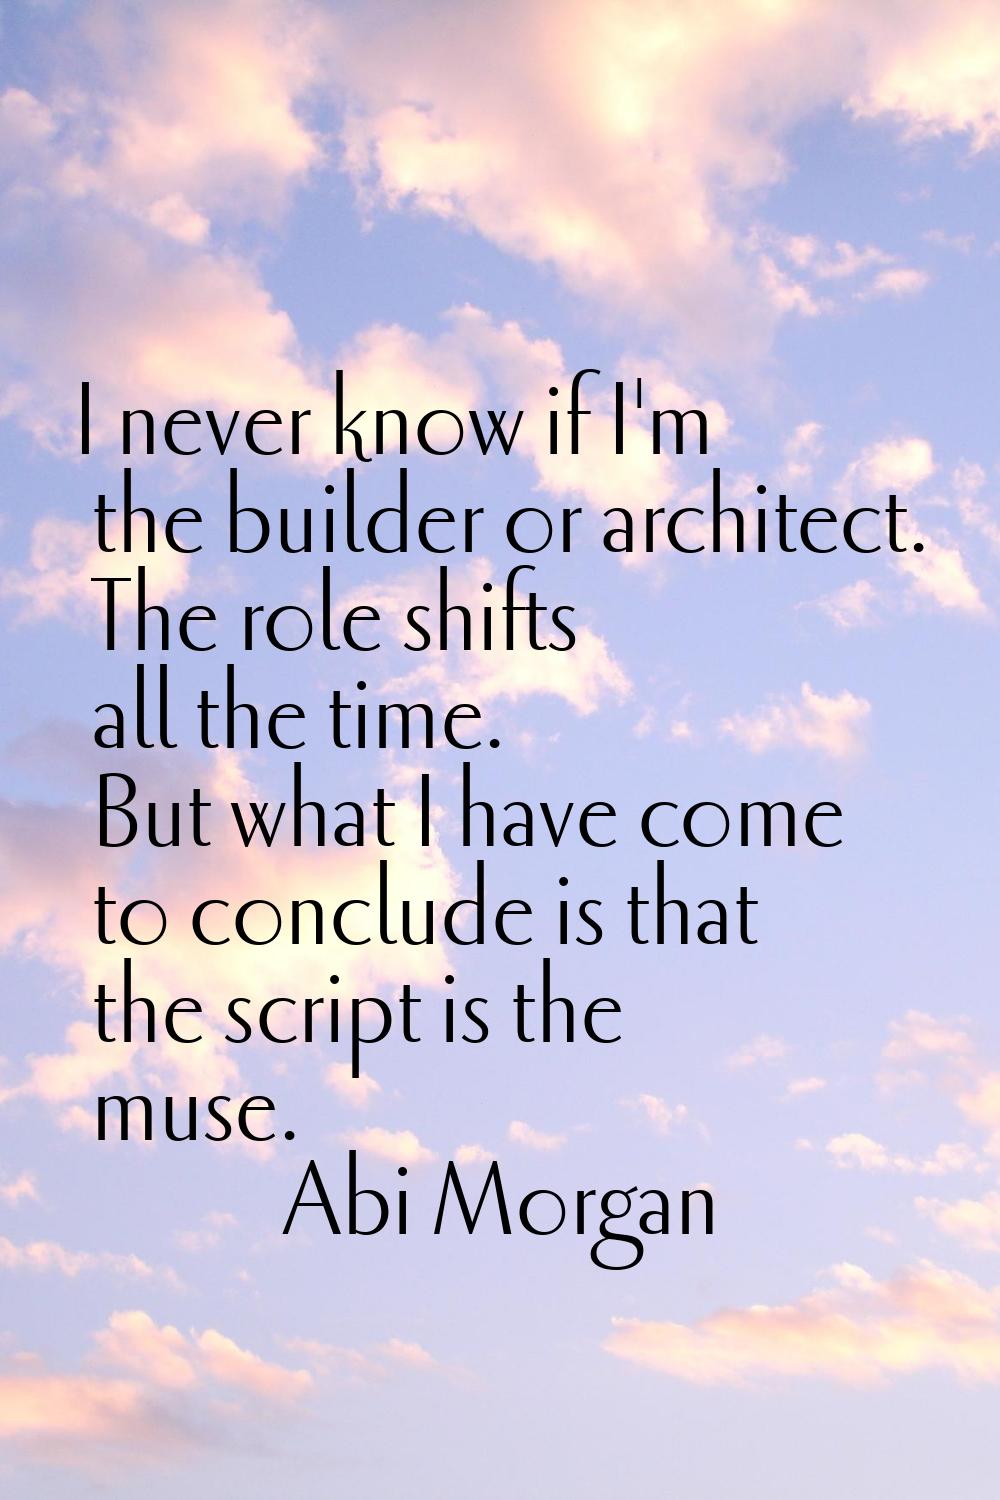 I never know if I'm the builder or architect. The role shifts all the time. But what I have come to